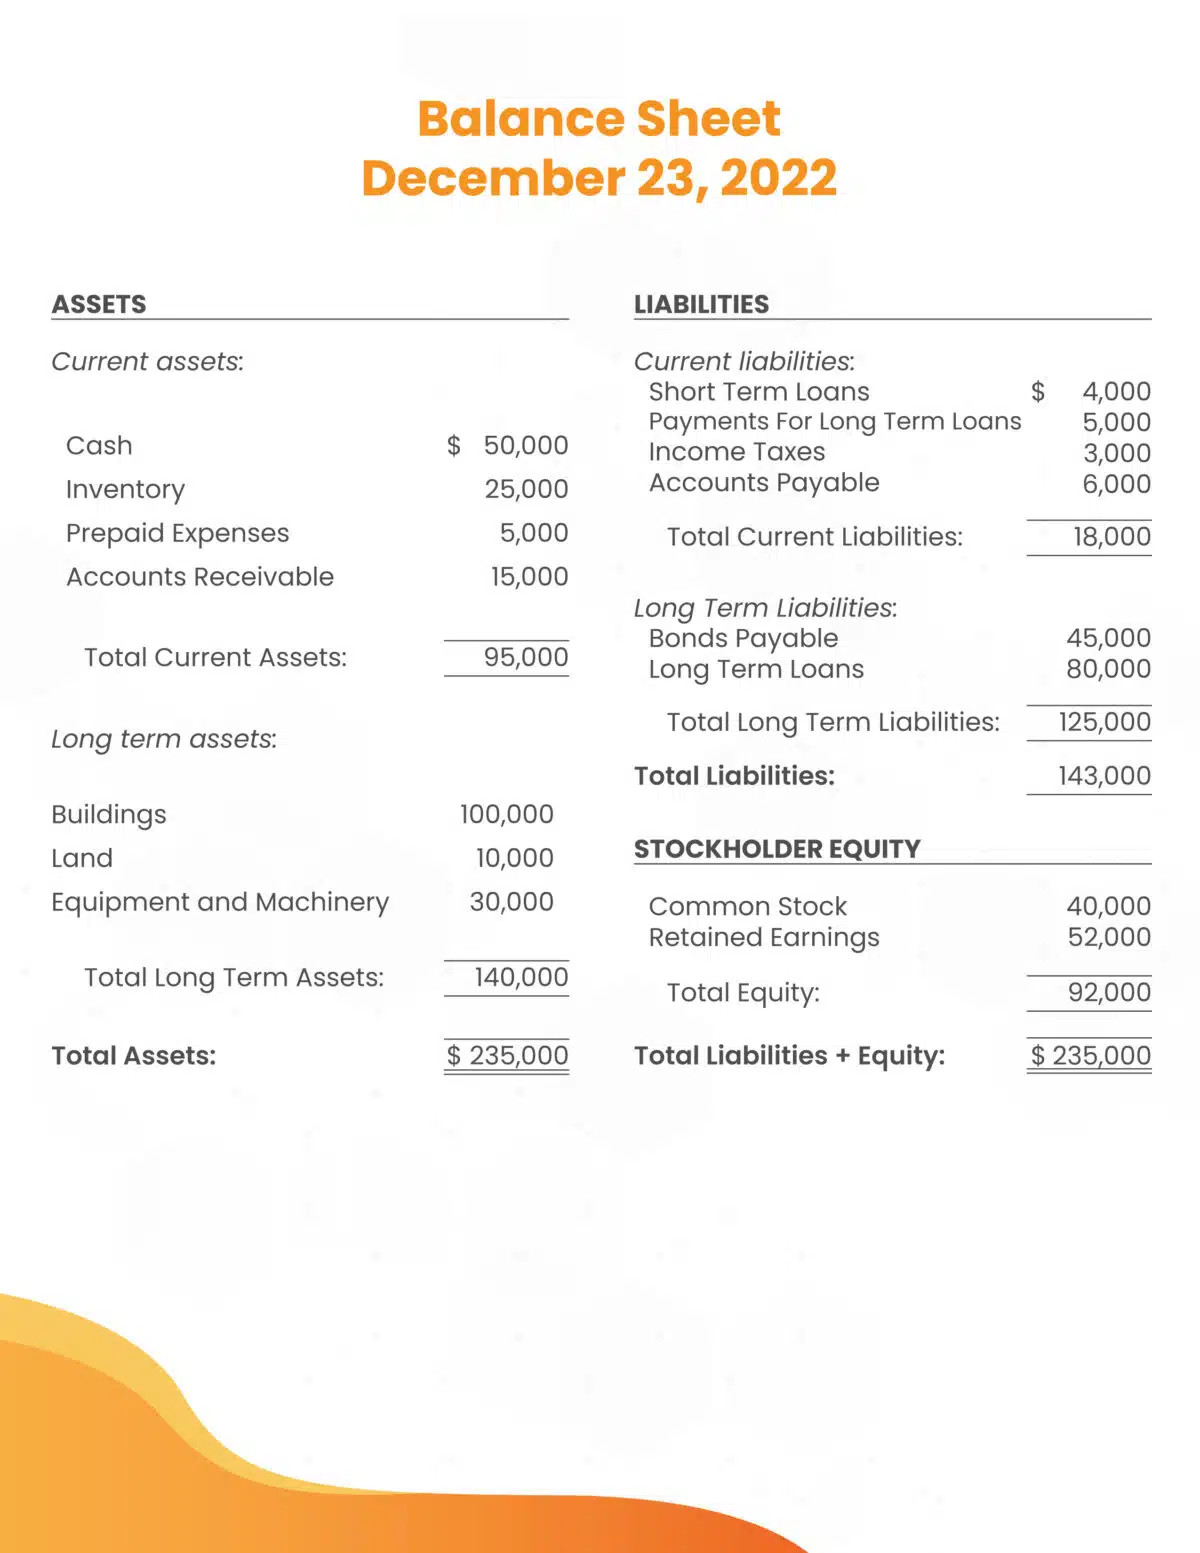 An example of a balance sheet showing current assets, liabilities, and stockholder equity